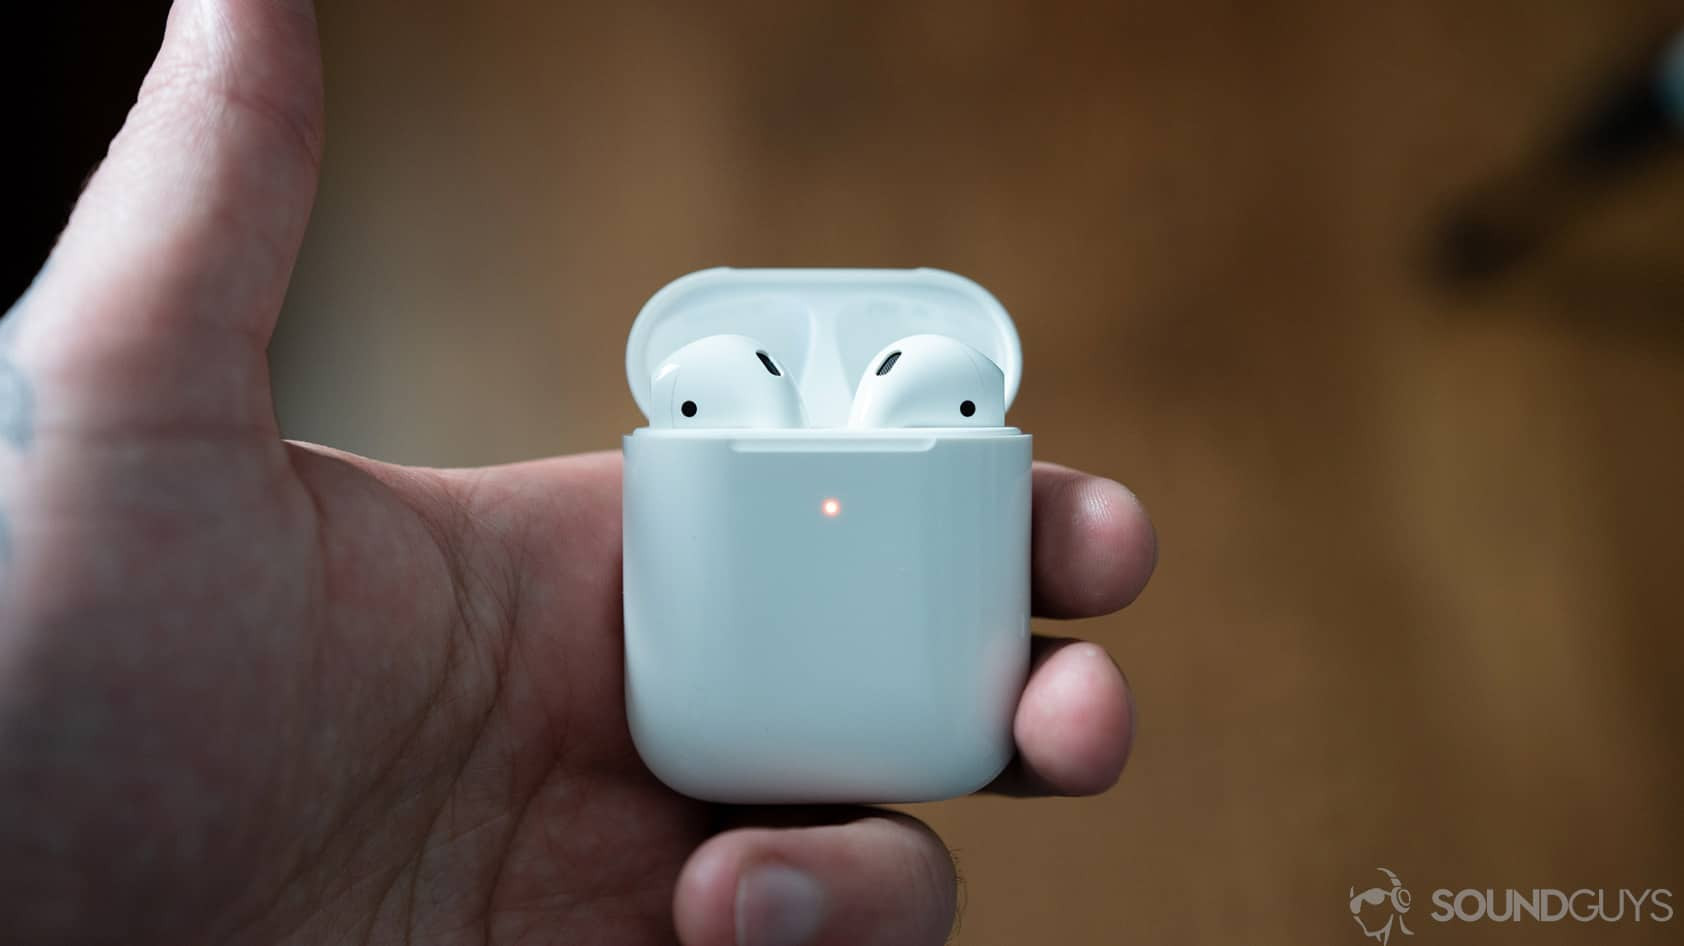  how to connect airpods to android